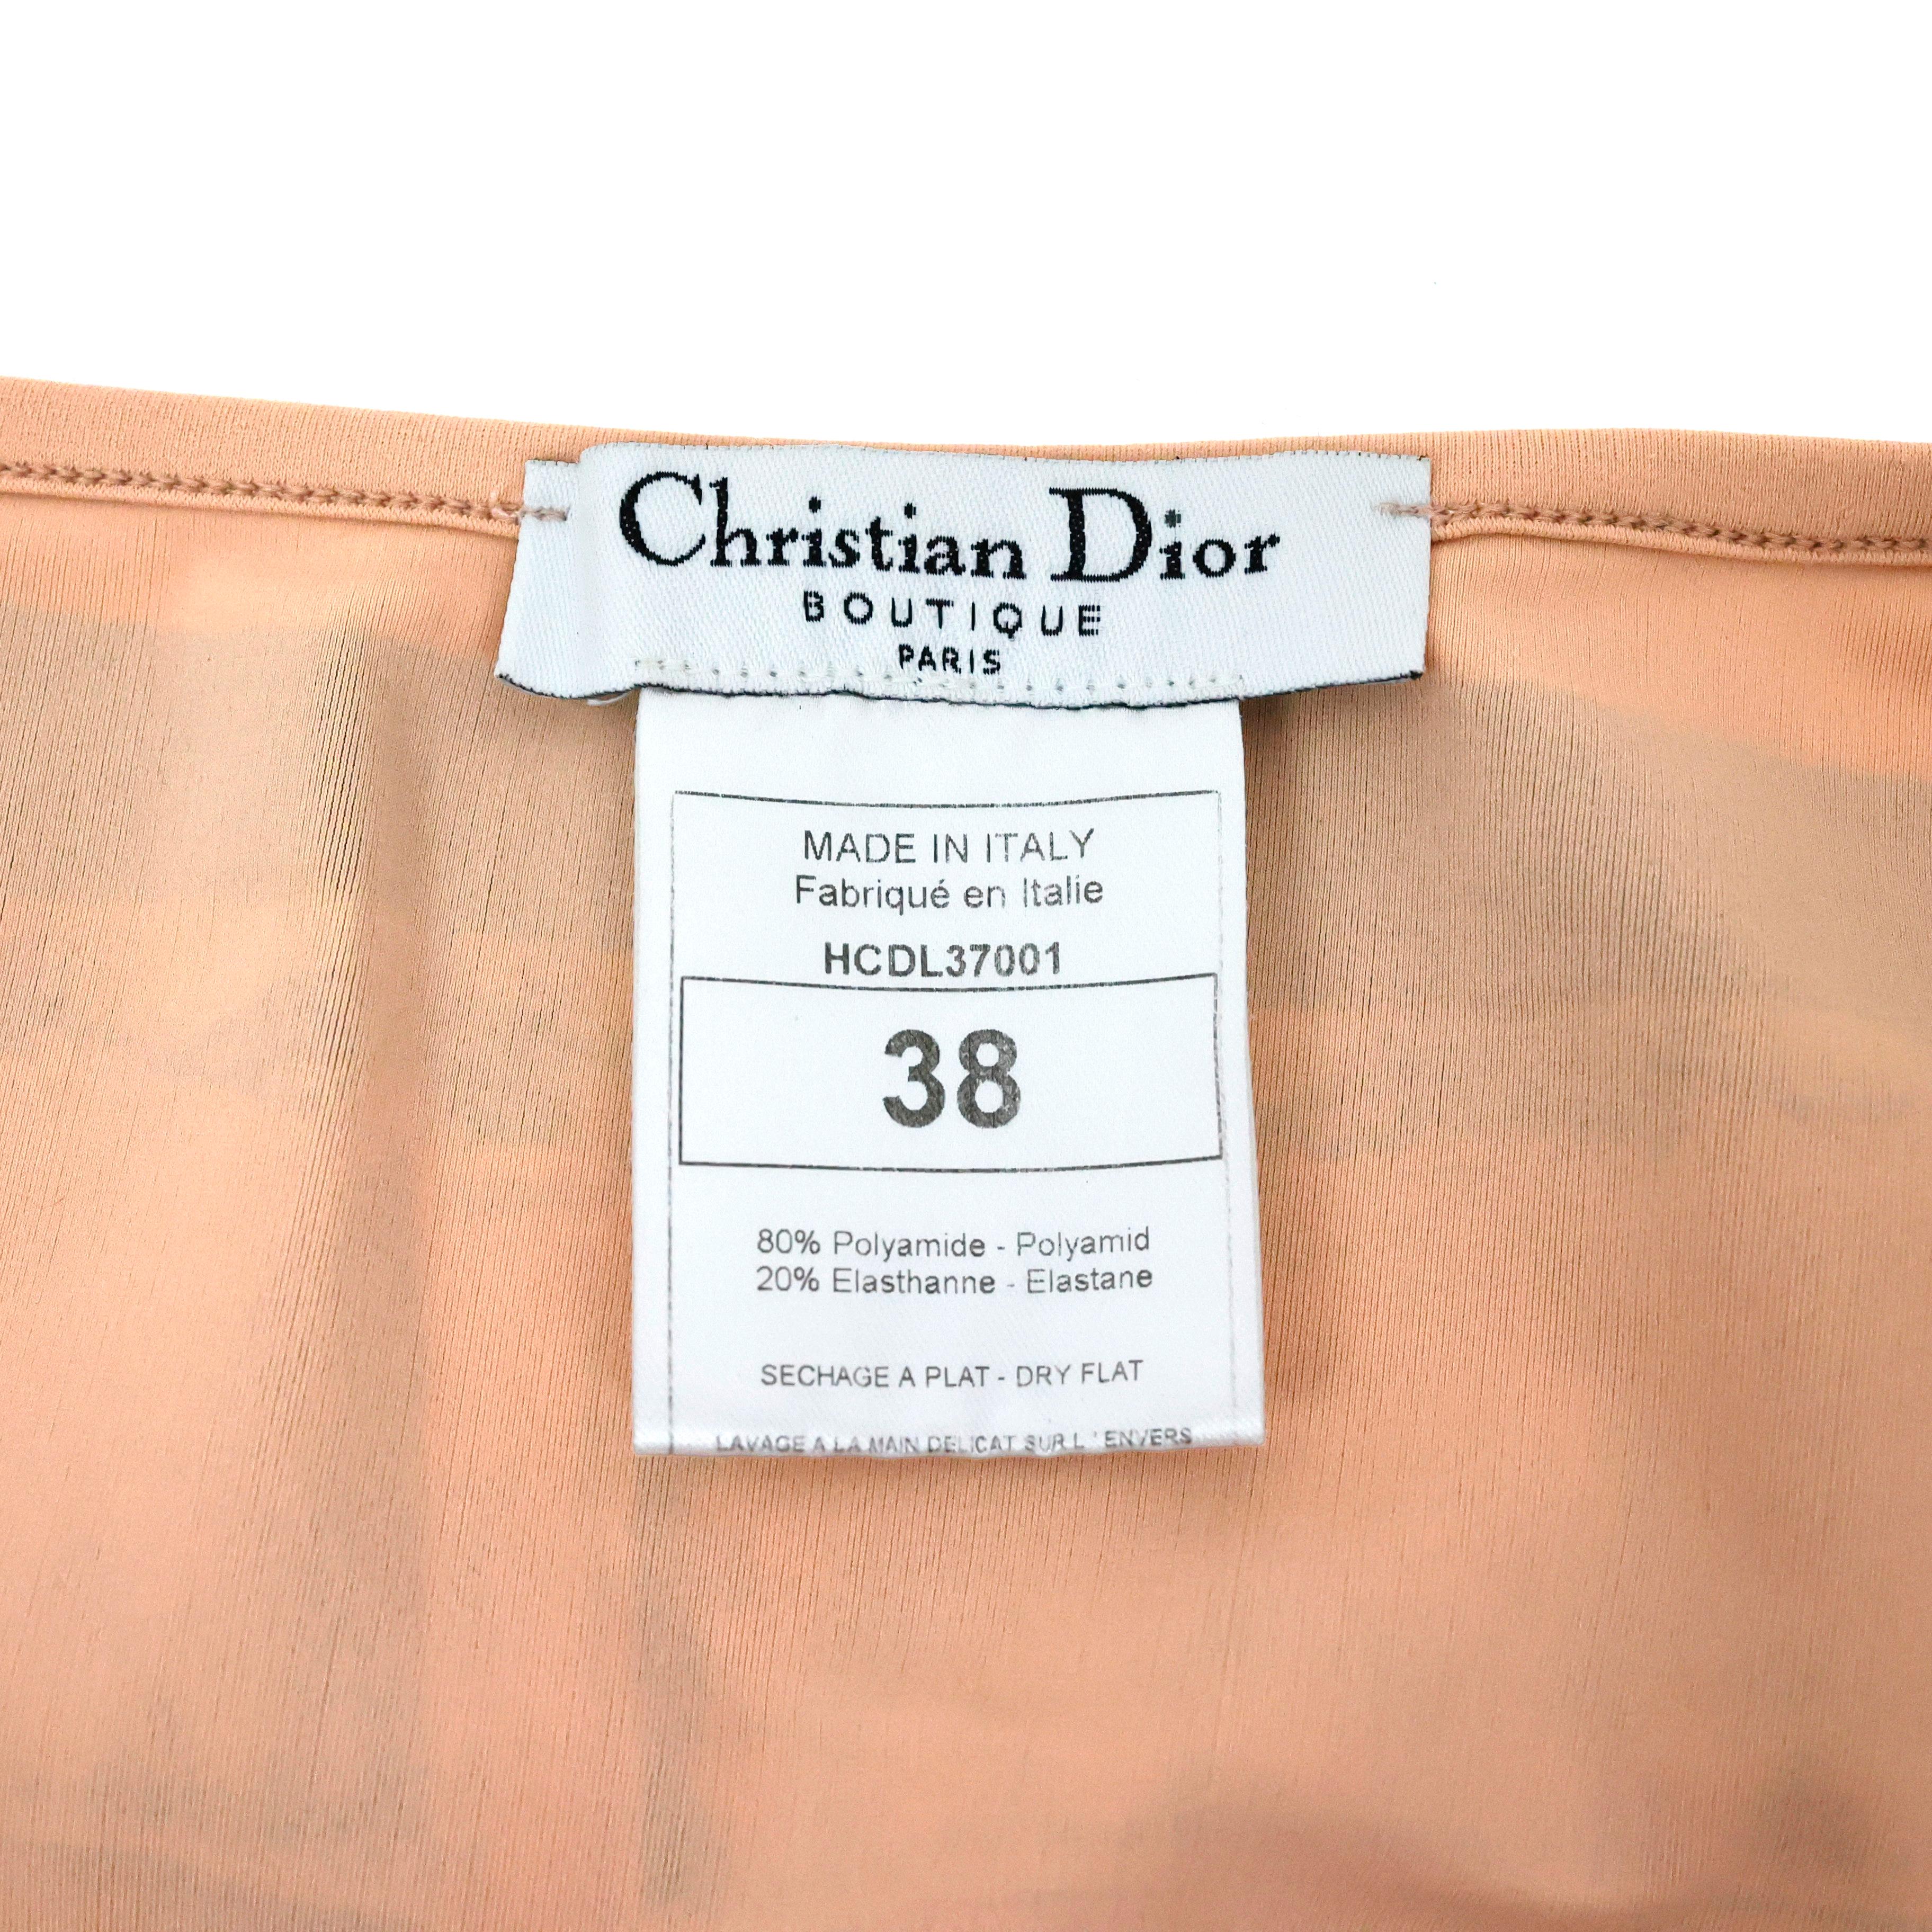 Christian Dior SS 2006 Trompe-l'oeil Pareo Skirt For Sale 1